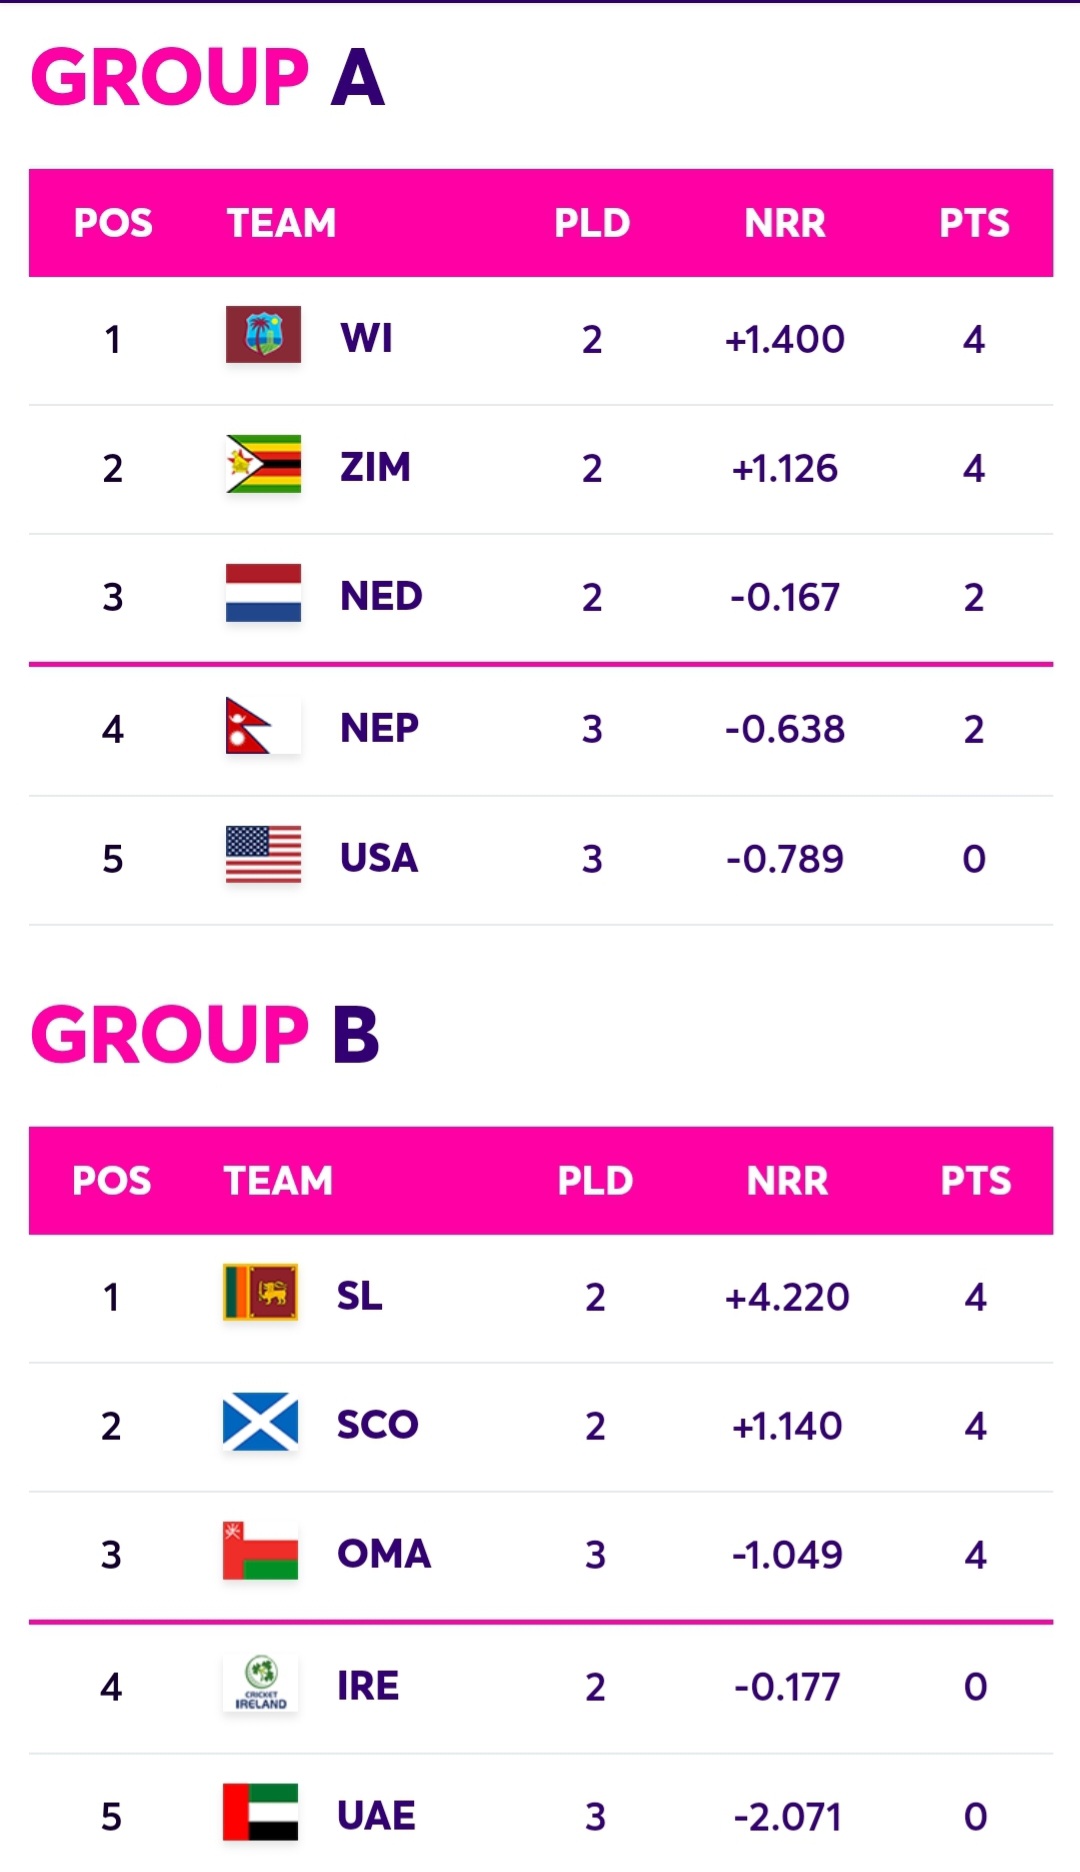 ICC Qualifiers Super Six Points Table: Who can qualify - NewsWire